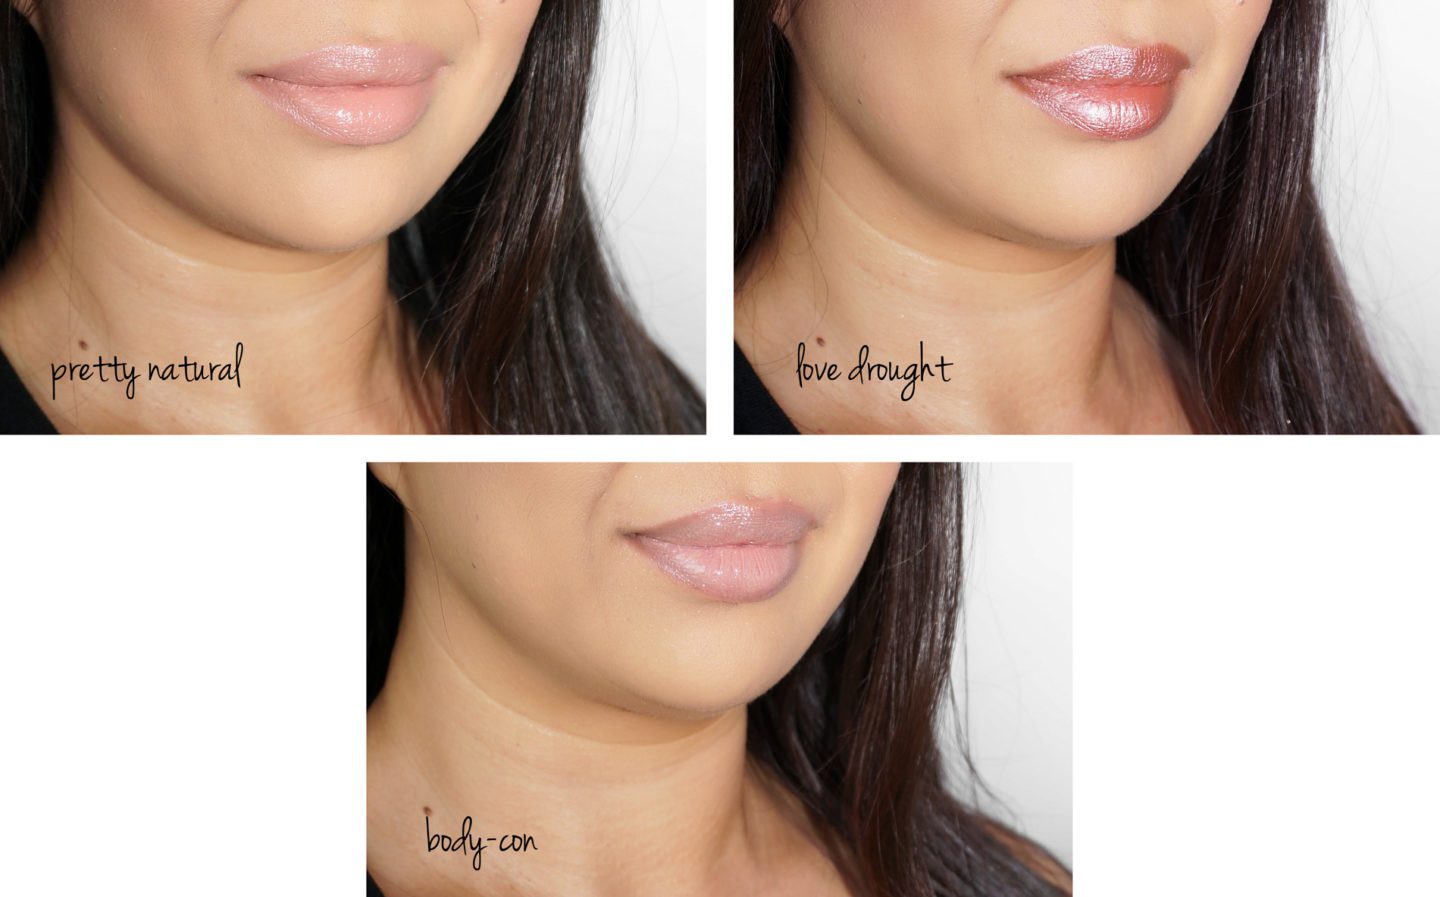 MAC Lip Trio Nude Nordstrom: Pretty Natural, Love Drought, Body-Con review and swatches